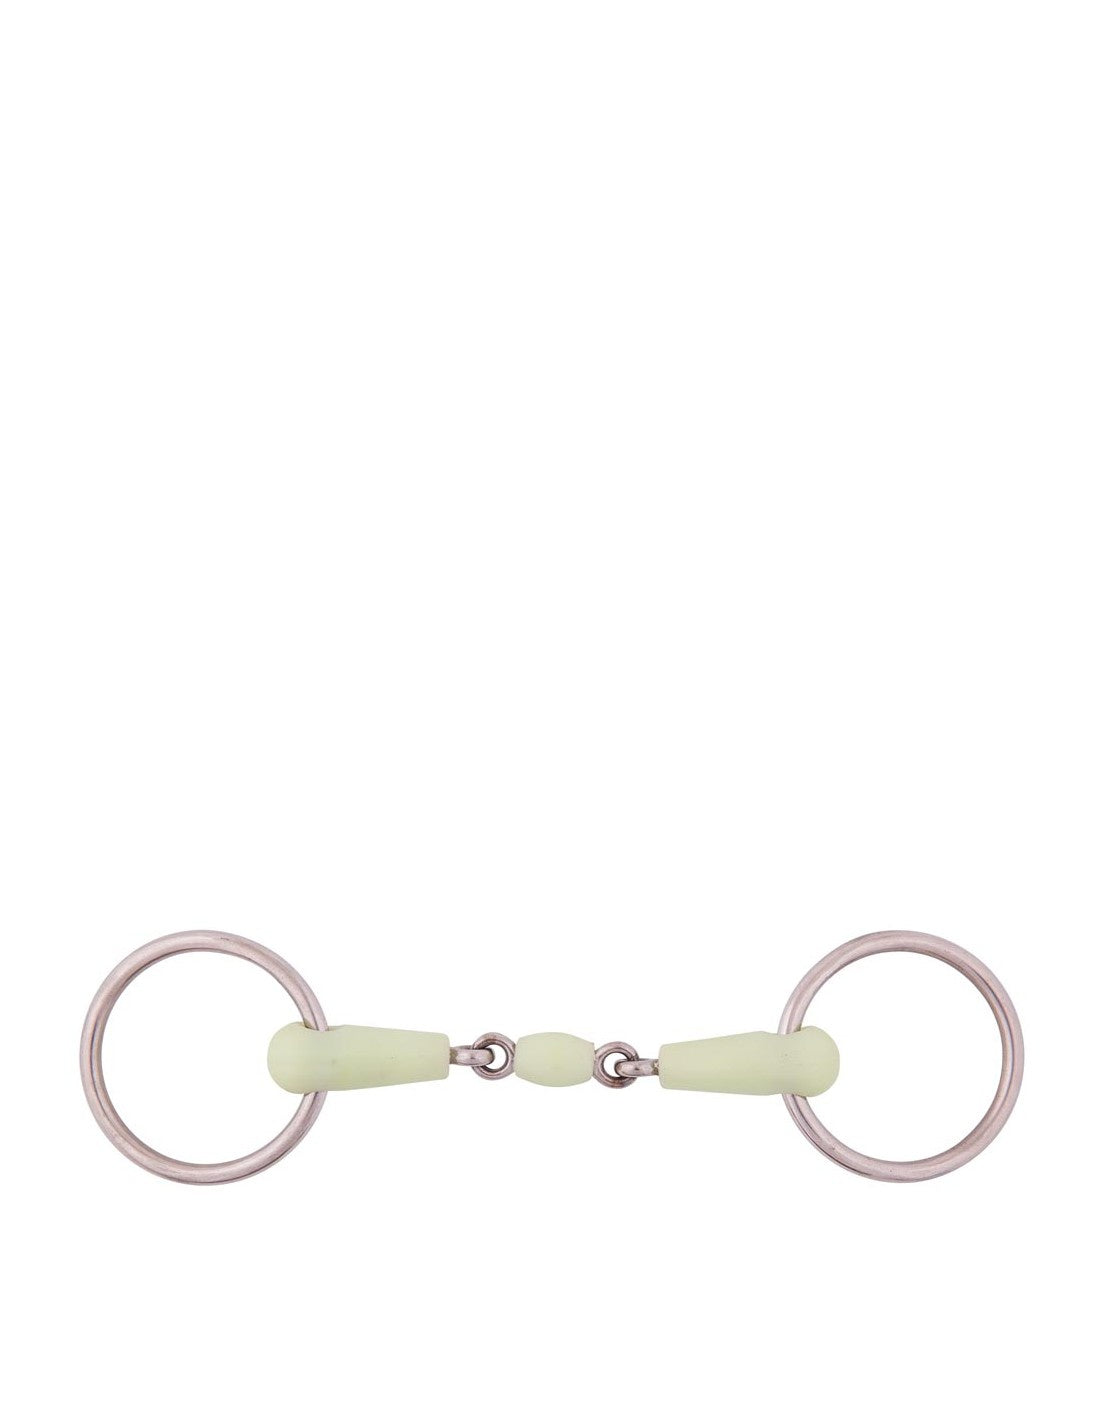 BR Double Jointed Loose Ring Snaffle Apple Mouth